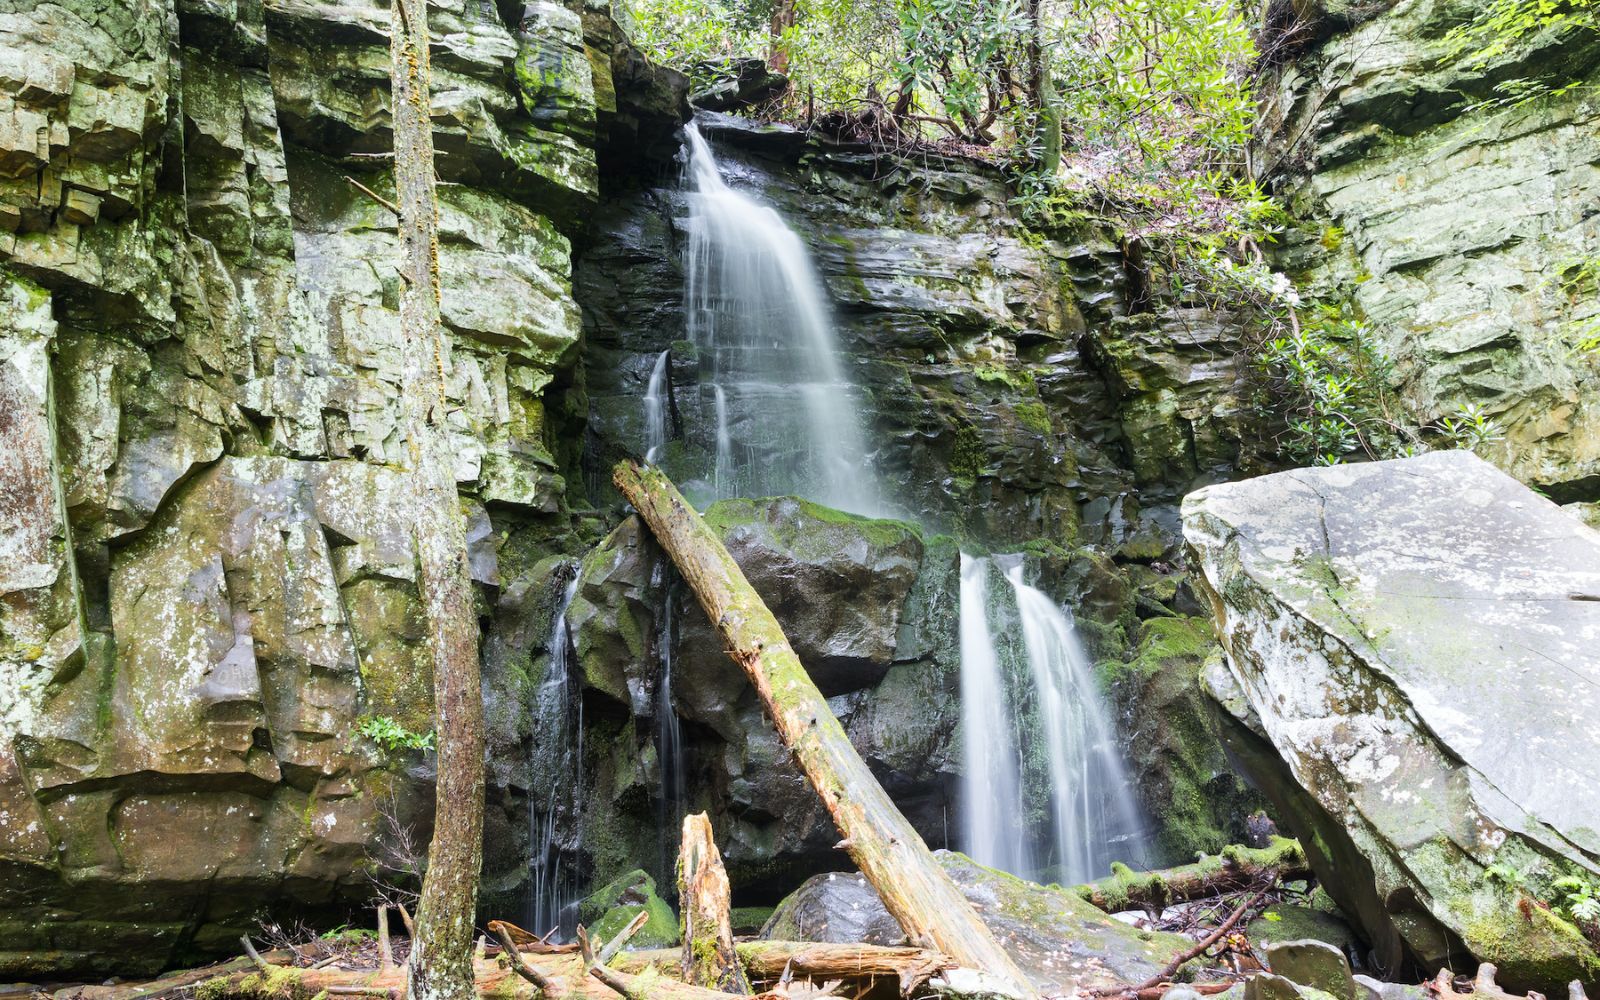 Baskin Falls in The Great Smoky Mountains